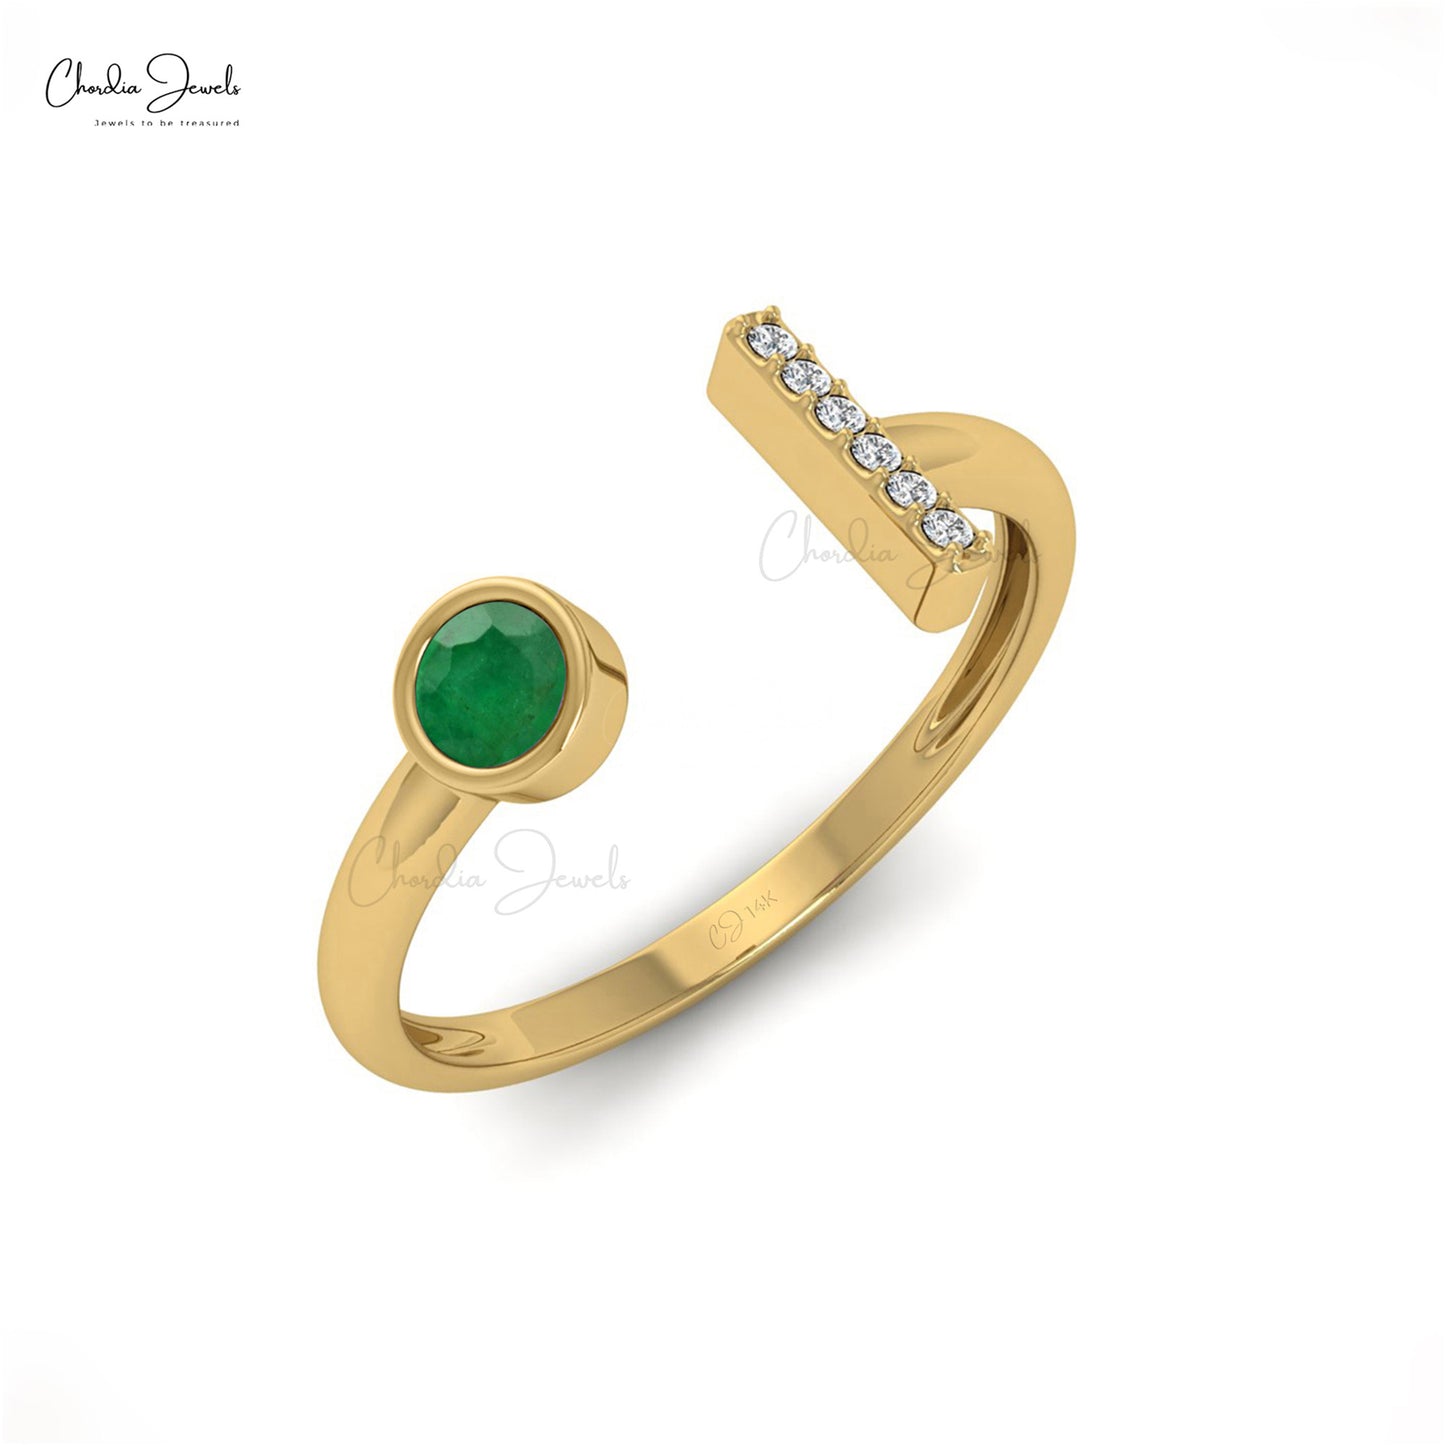 Make a statement with this emerald minimalist ring.